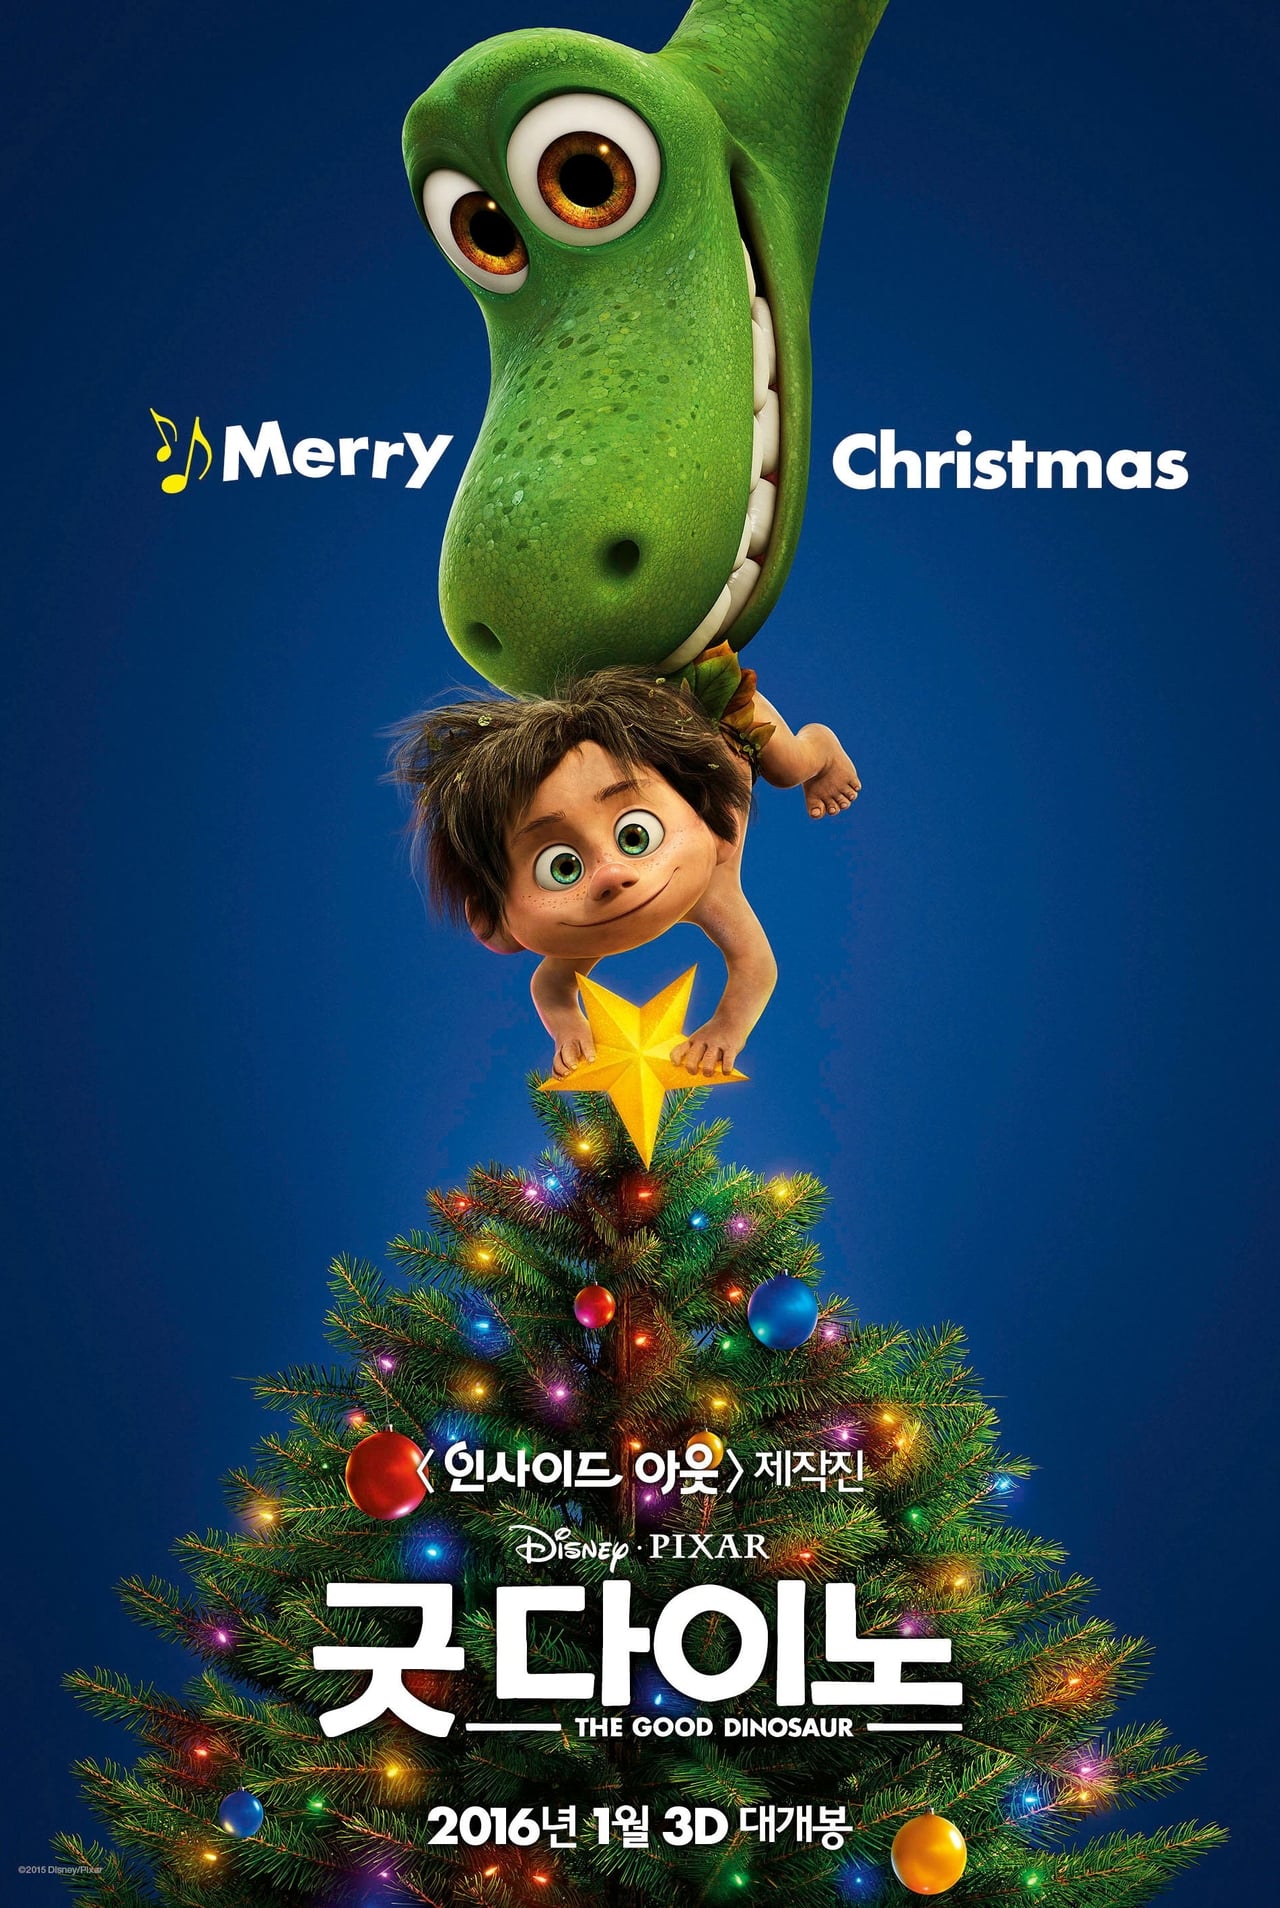 Watch The Good Dinosaur (2015) Movie at film.mouflix.us